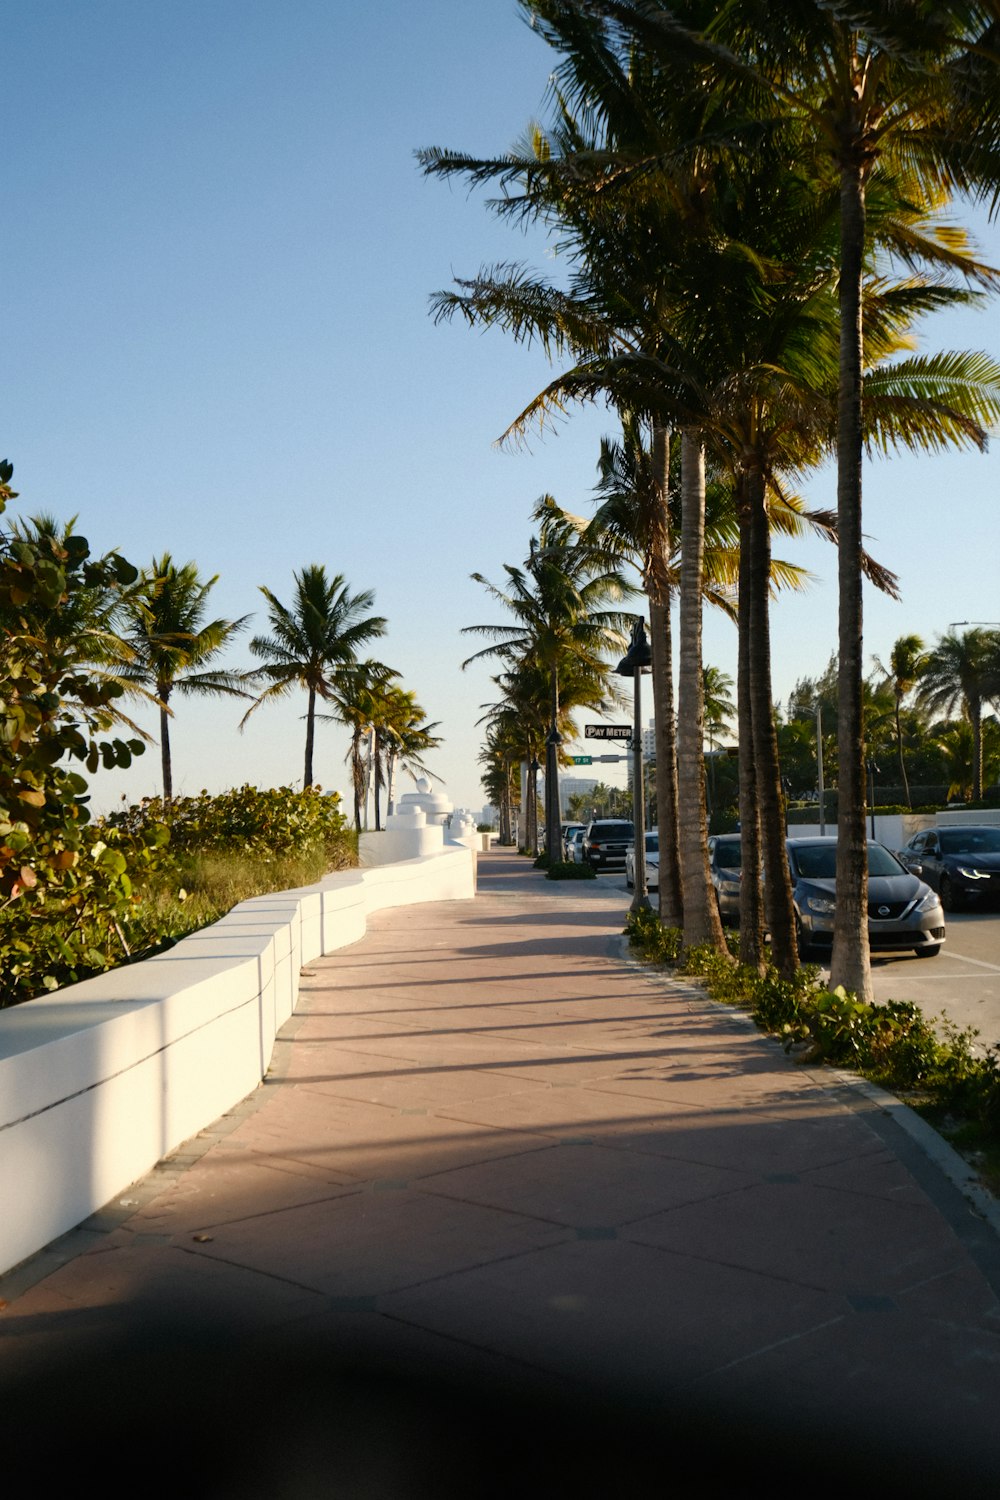 a sidewalk lined with palm trees and parked cars